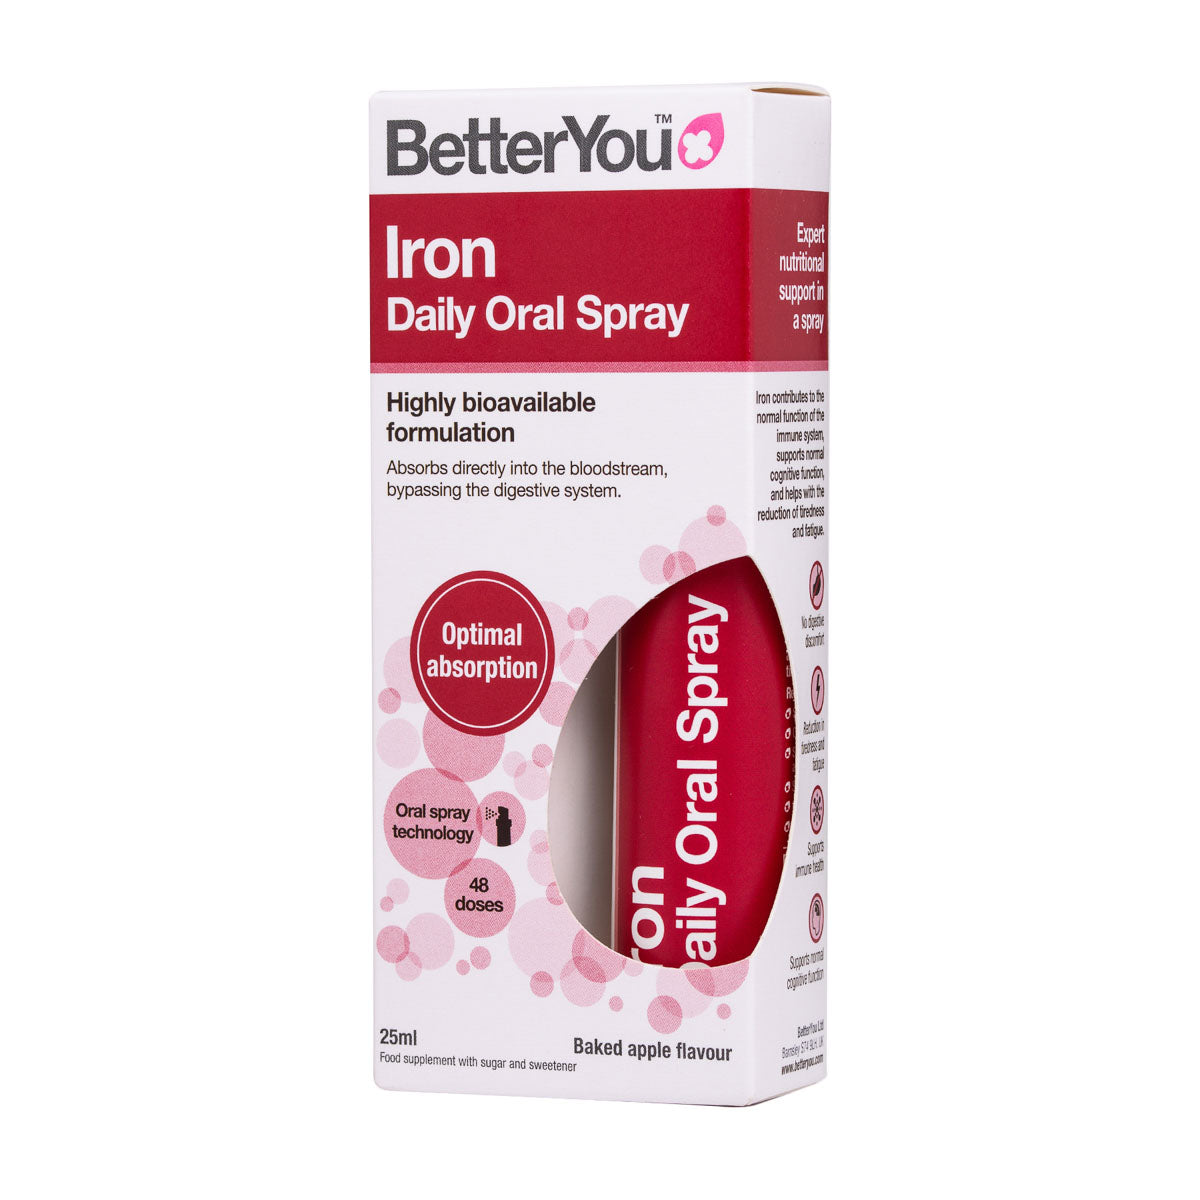 Daily Iron Oral Spray Vegan (25ml) | Better You | Raw Living UK | Supplements | BetterYou Daily Iron Oral Spray is gluten, wheat &amp; dairy free (no artificial colours/flavours). It is an iron supplement without the usual digestive discomfort.